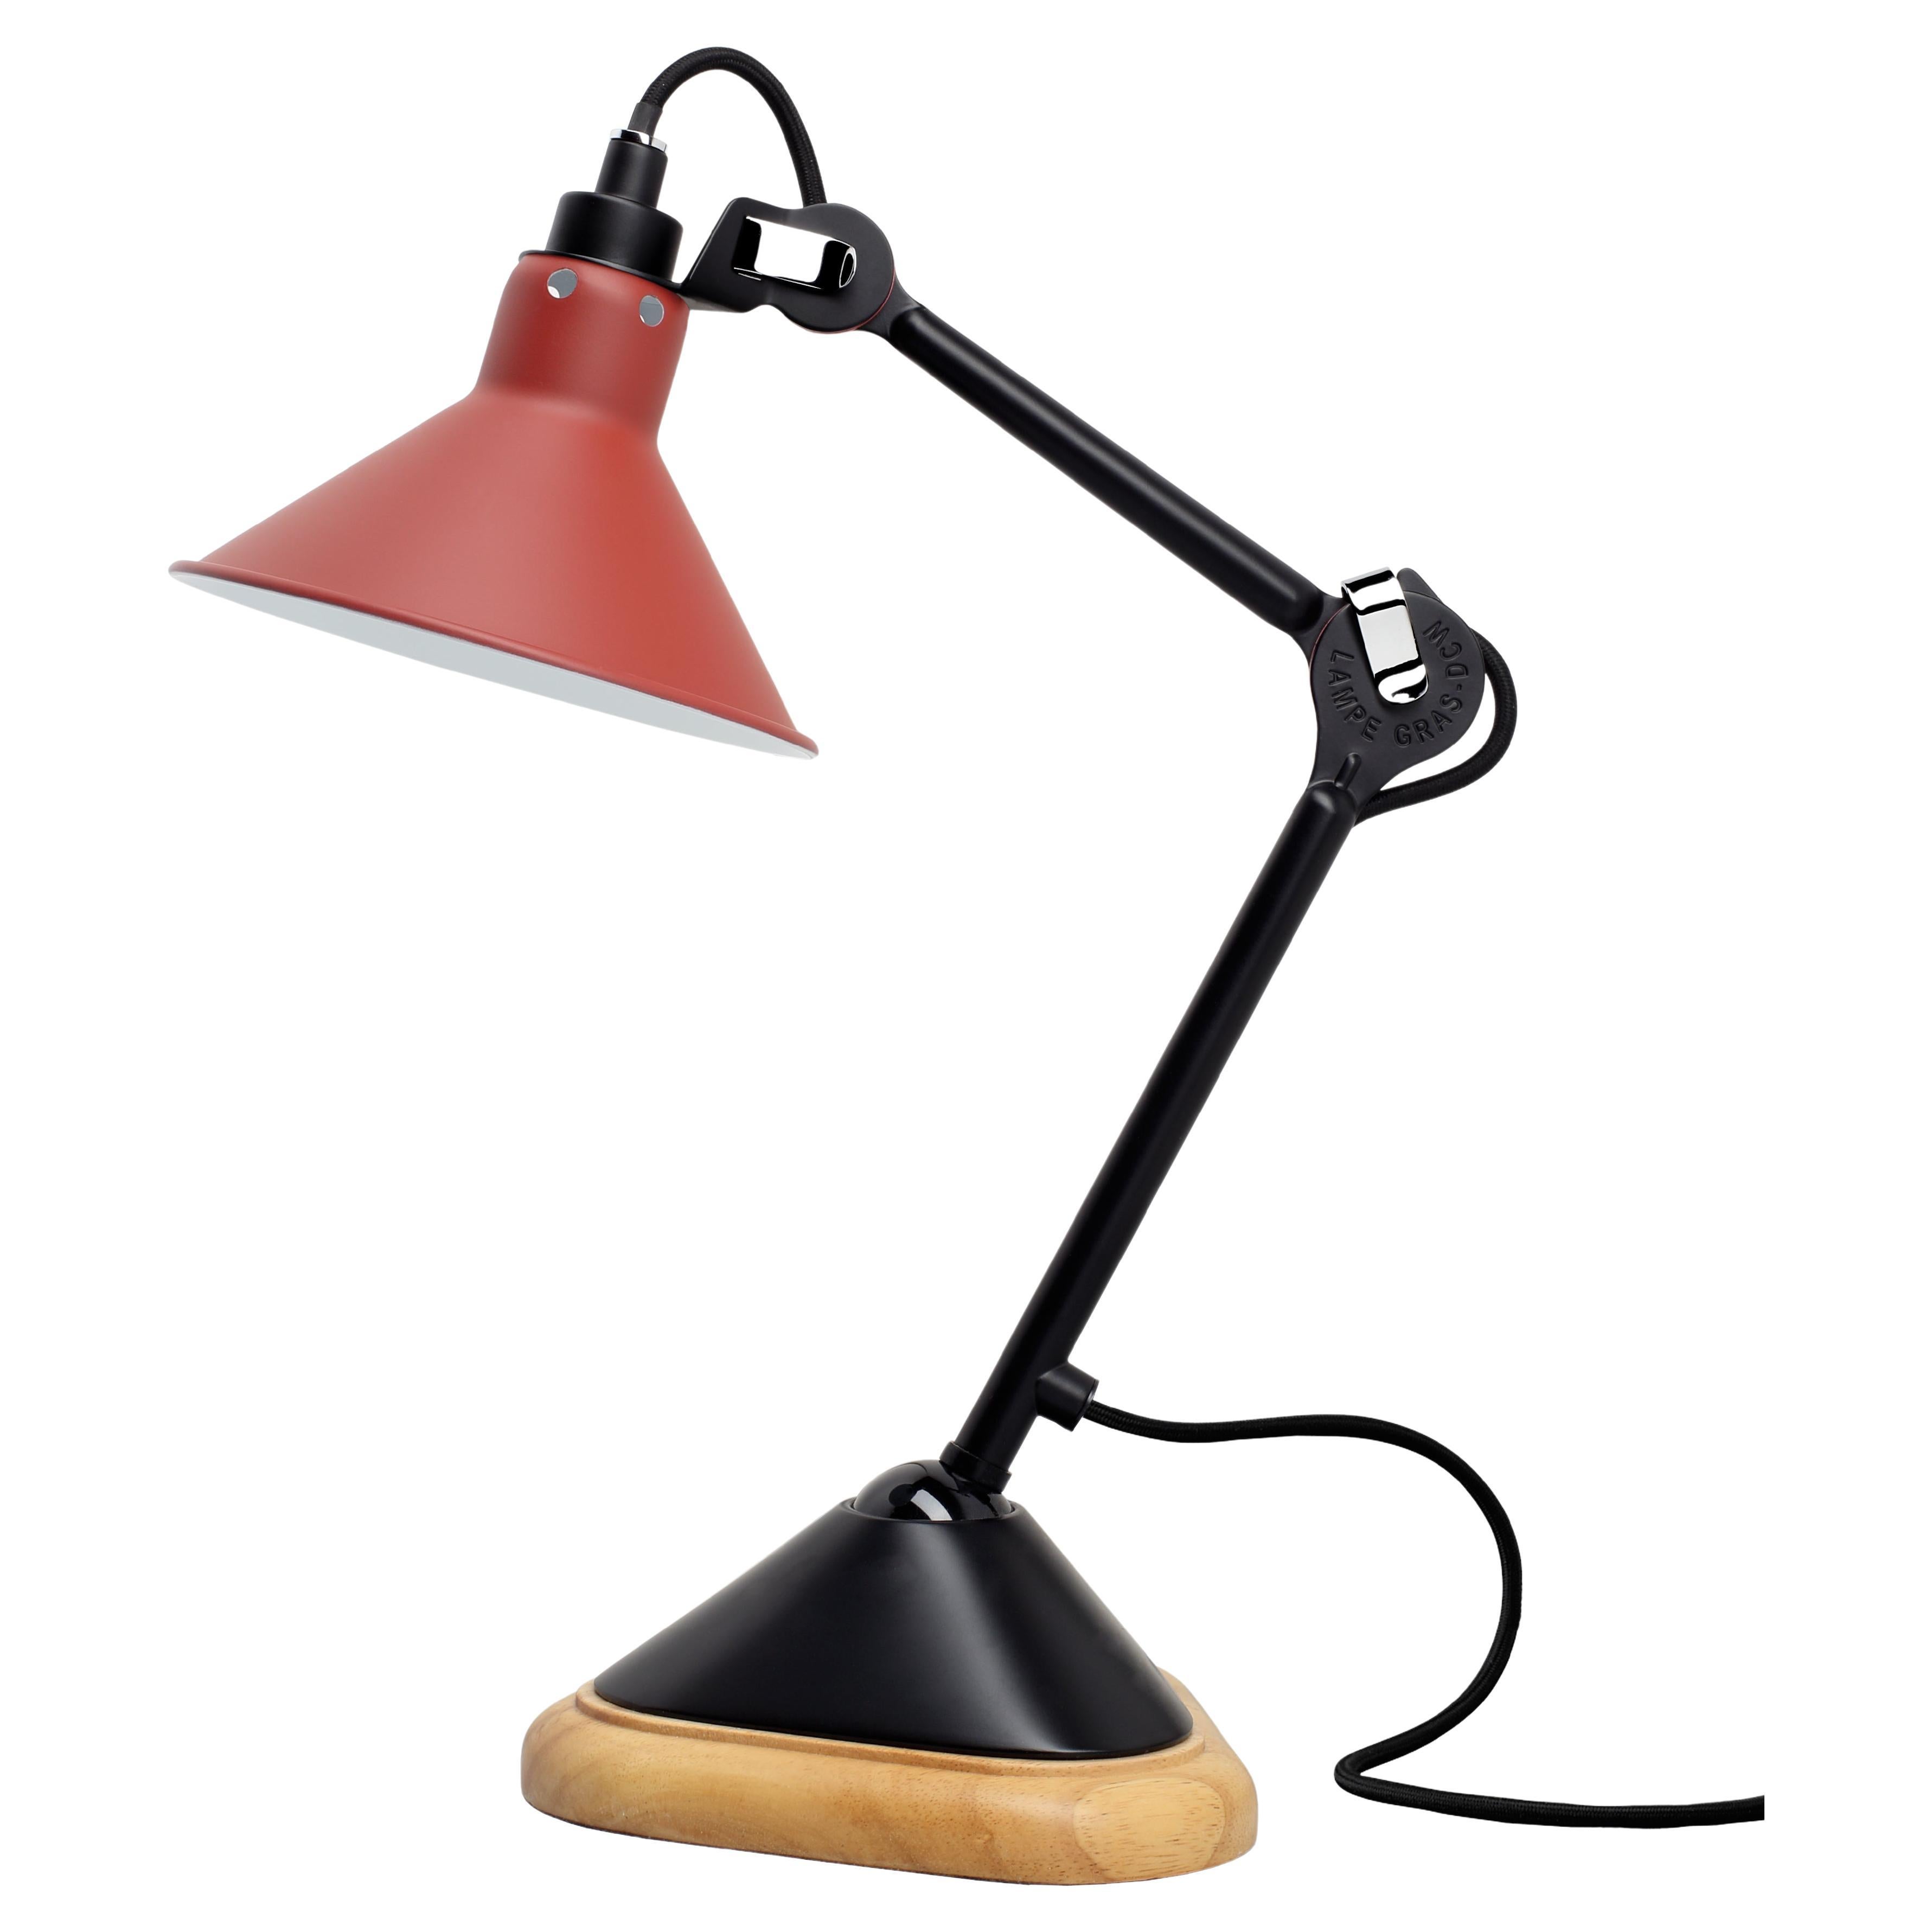 DCW Editions La Lampe Gras N°207 Conic Table Lamp in Black Arm with Red Shade For Sale